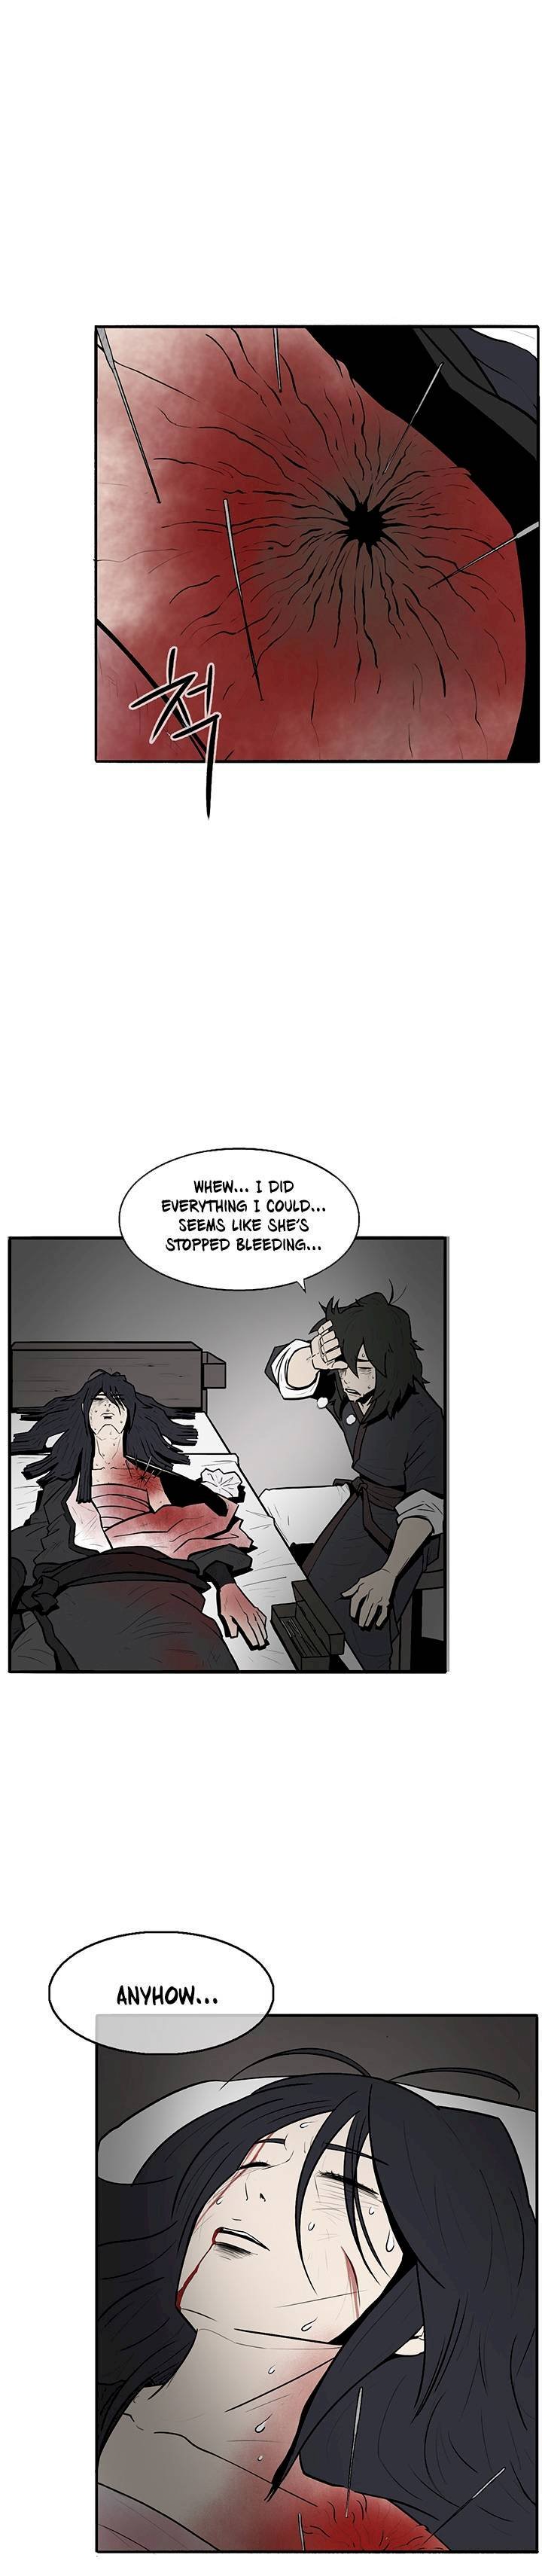 legend-of-the-northern-blade-chap-4-6